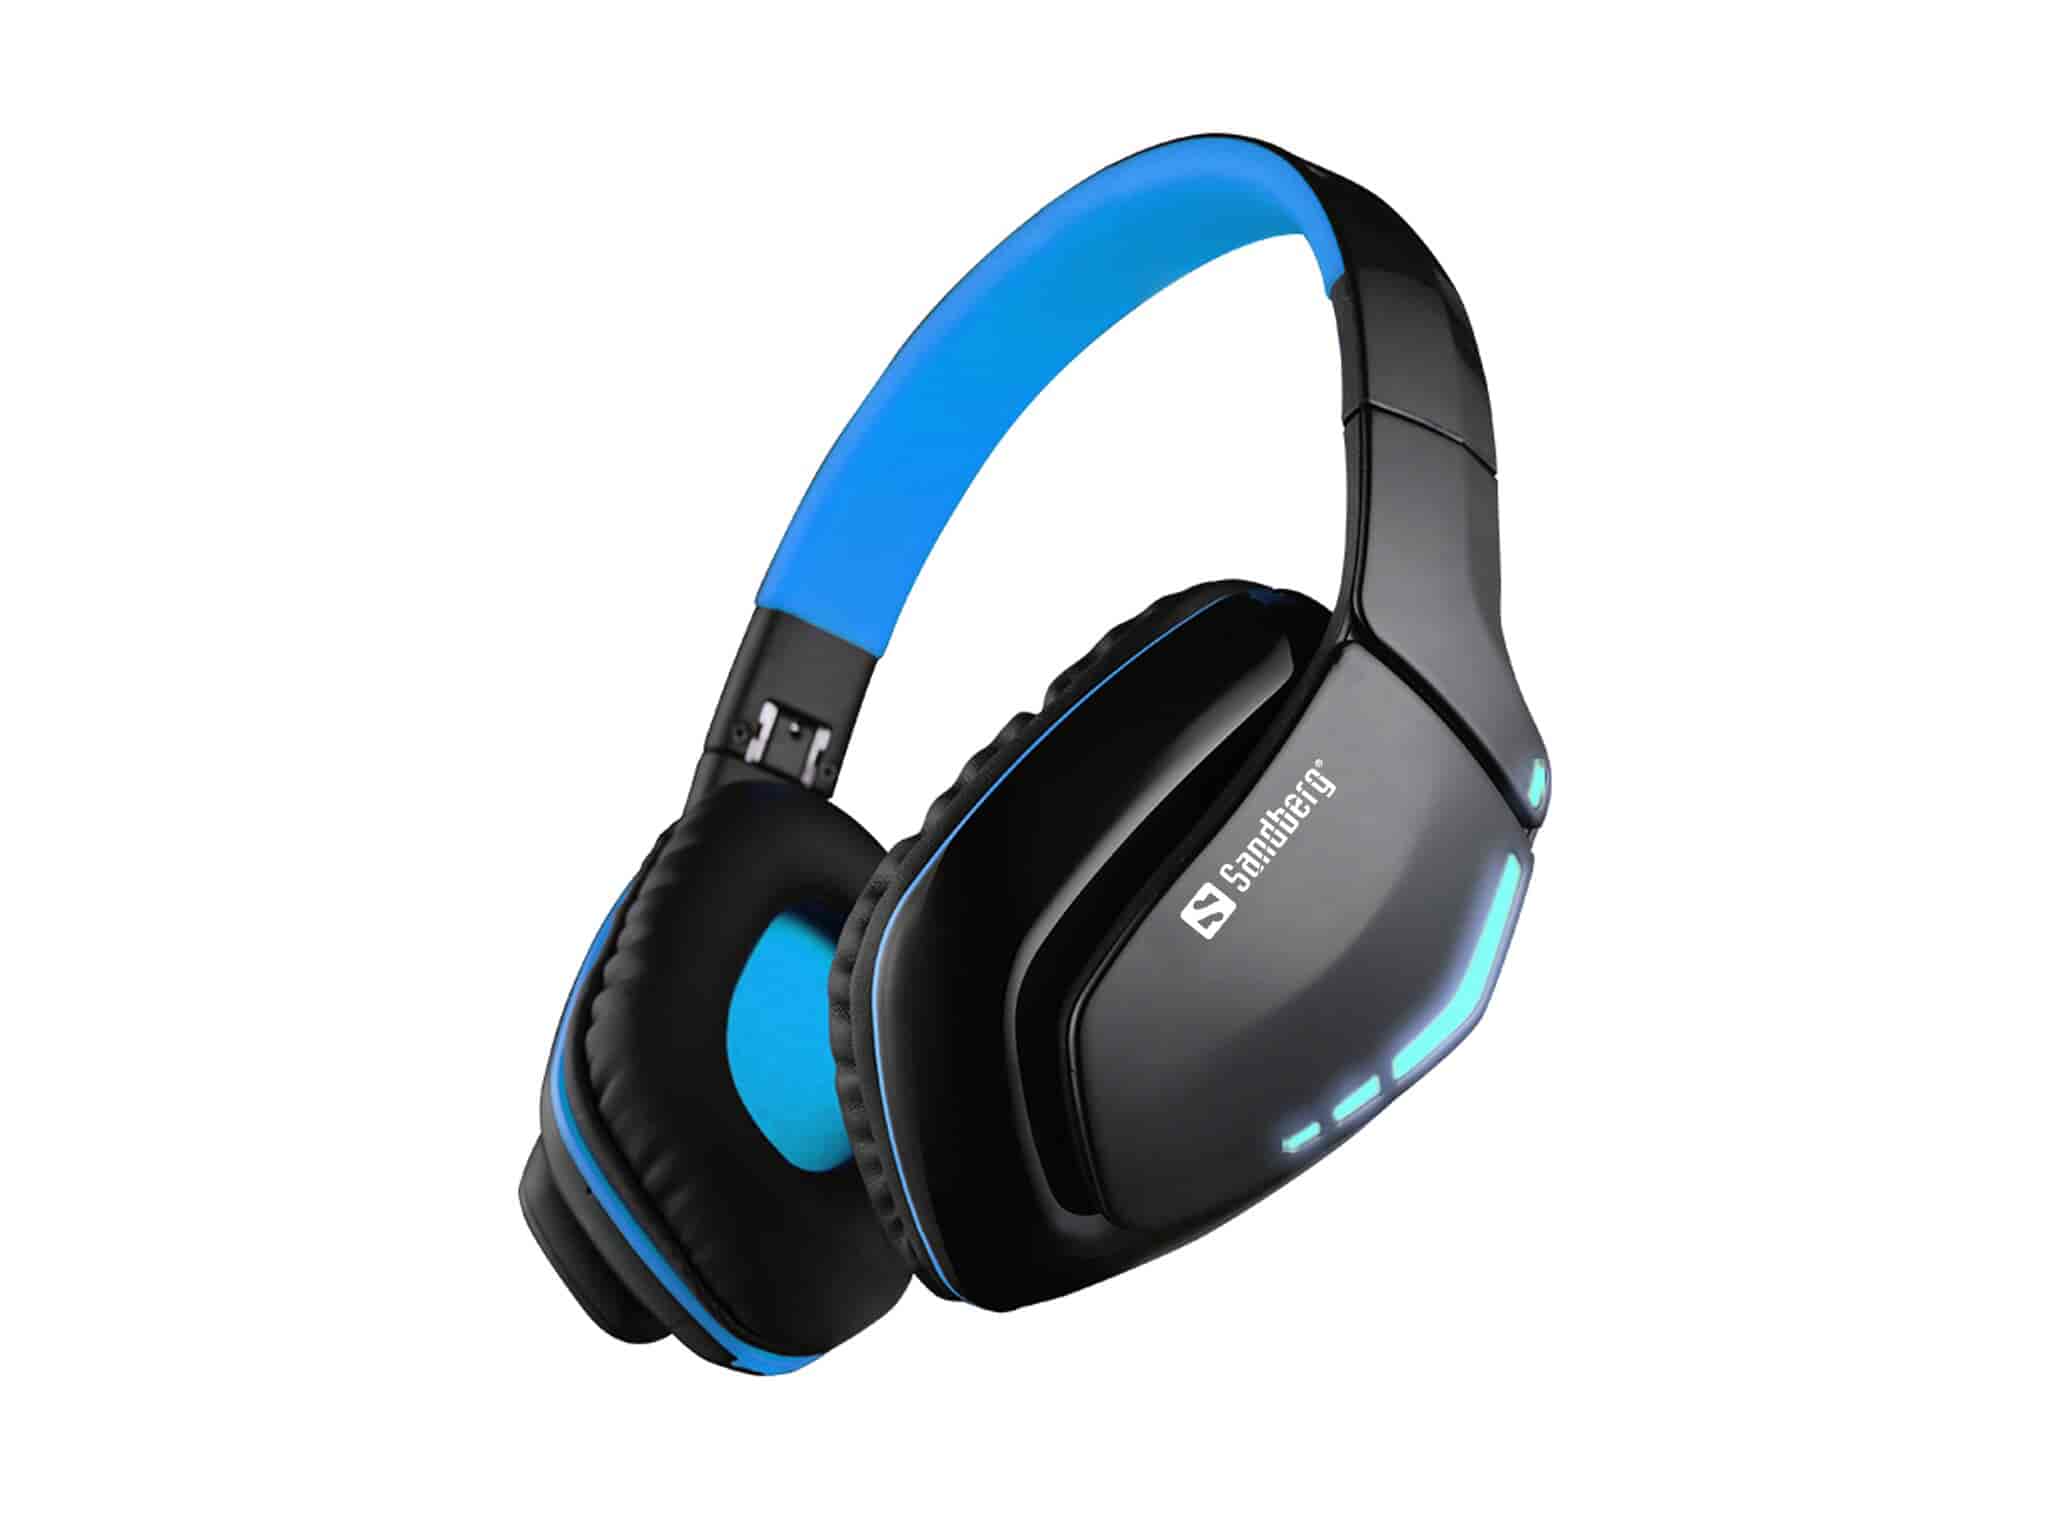 Sandberg Blue Storm Wireless HeadsetThe Sandberg Blue Storm Wireless Headset connects wirelessly to a Bluetooth device such as a mobile phone or tablet computer. Remote control your Bluetooth device with the track and volume controls on the headset. The built-in battery gives 10 hours of playback. Allows you to make hands-free and wireless calls.Sandberg